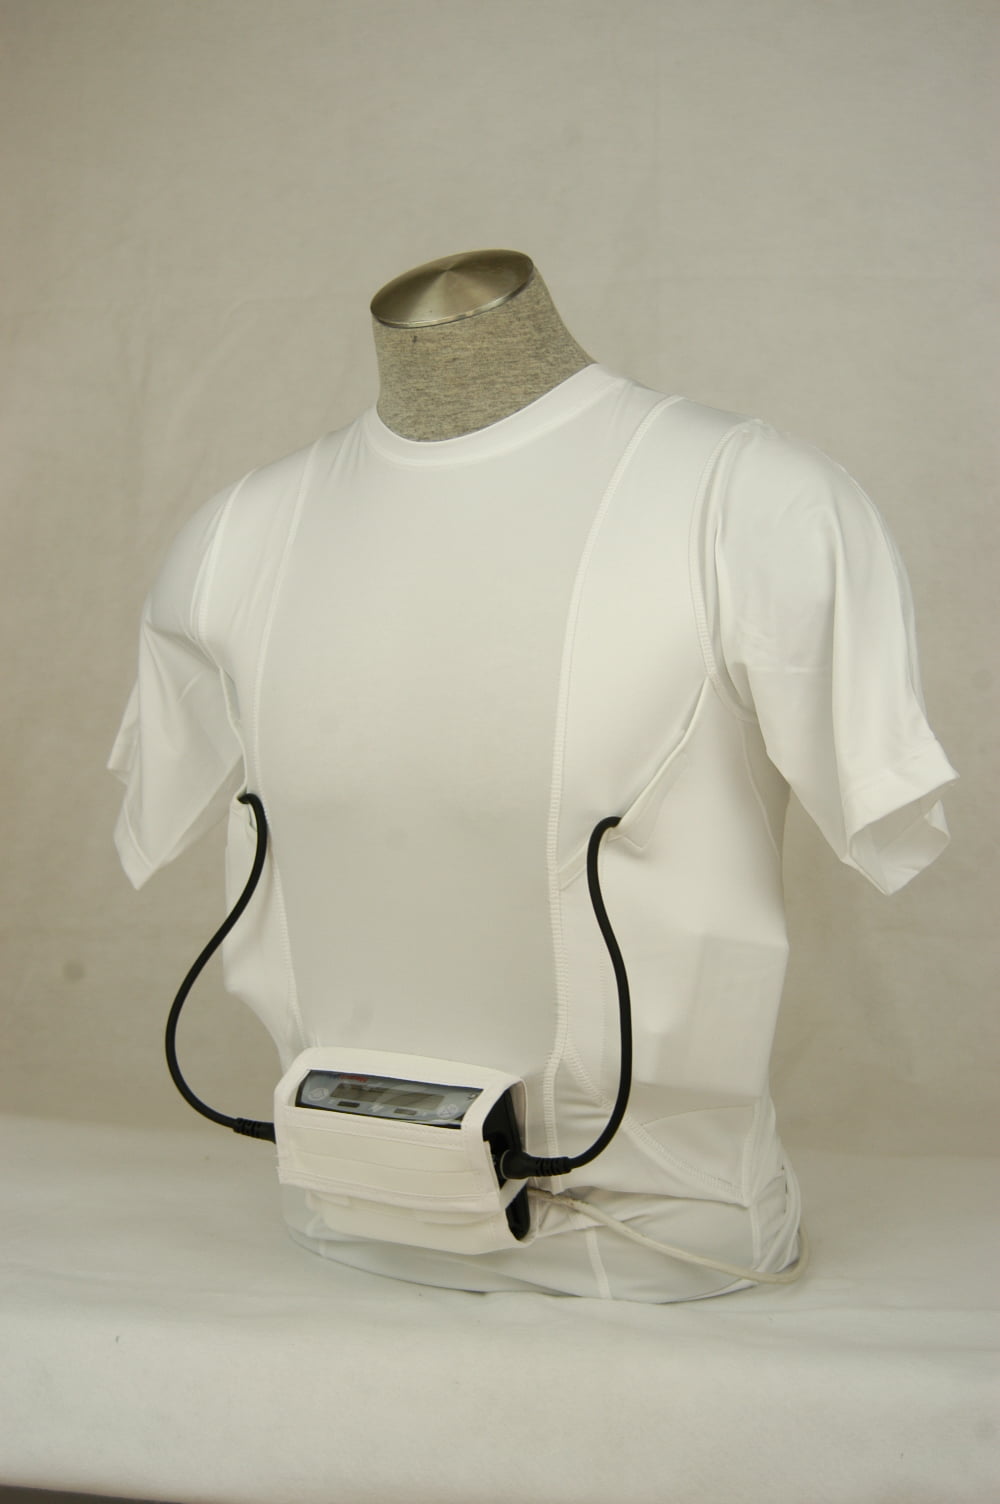 LVAD Backpack with Heartmate Controller Pocket & Two Battery Pockets